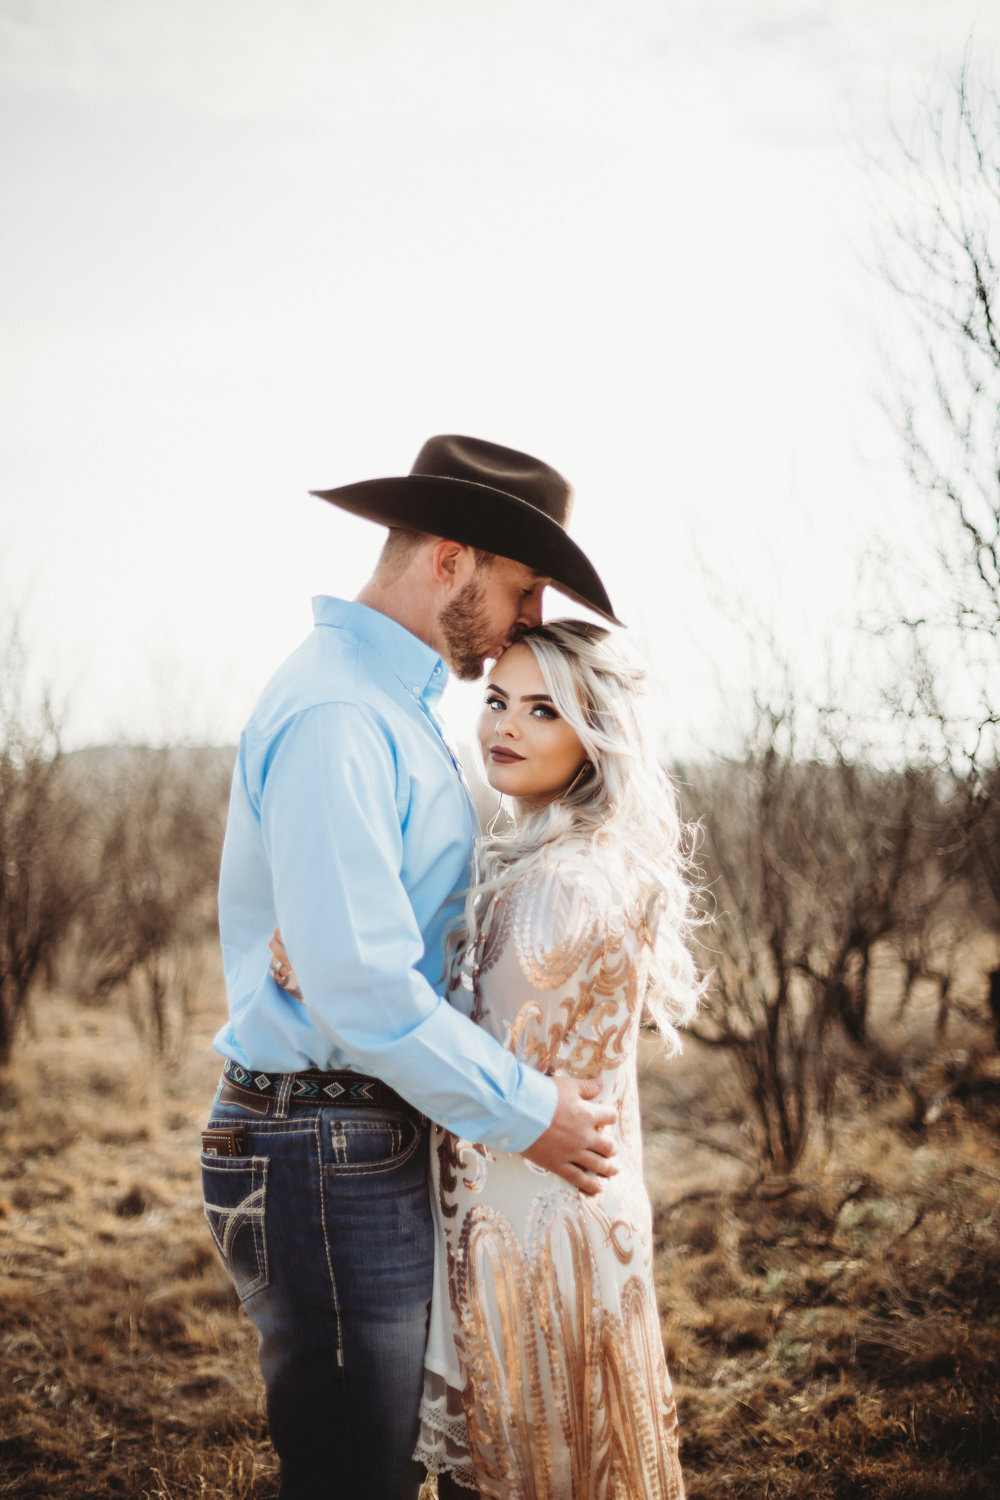  Close up of engaged couple with neutral background and kiss on the forehead #engagementphotos #engaged #personality #amarillotexas #engagementphotographer #lifestylephotos #amarillophotographer #locationchoice #texasengagementphotos #engagment #tealawardphotography #westernstyle 